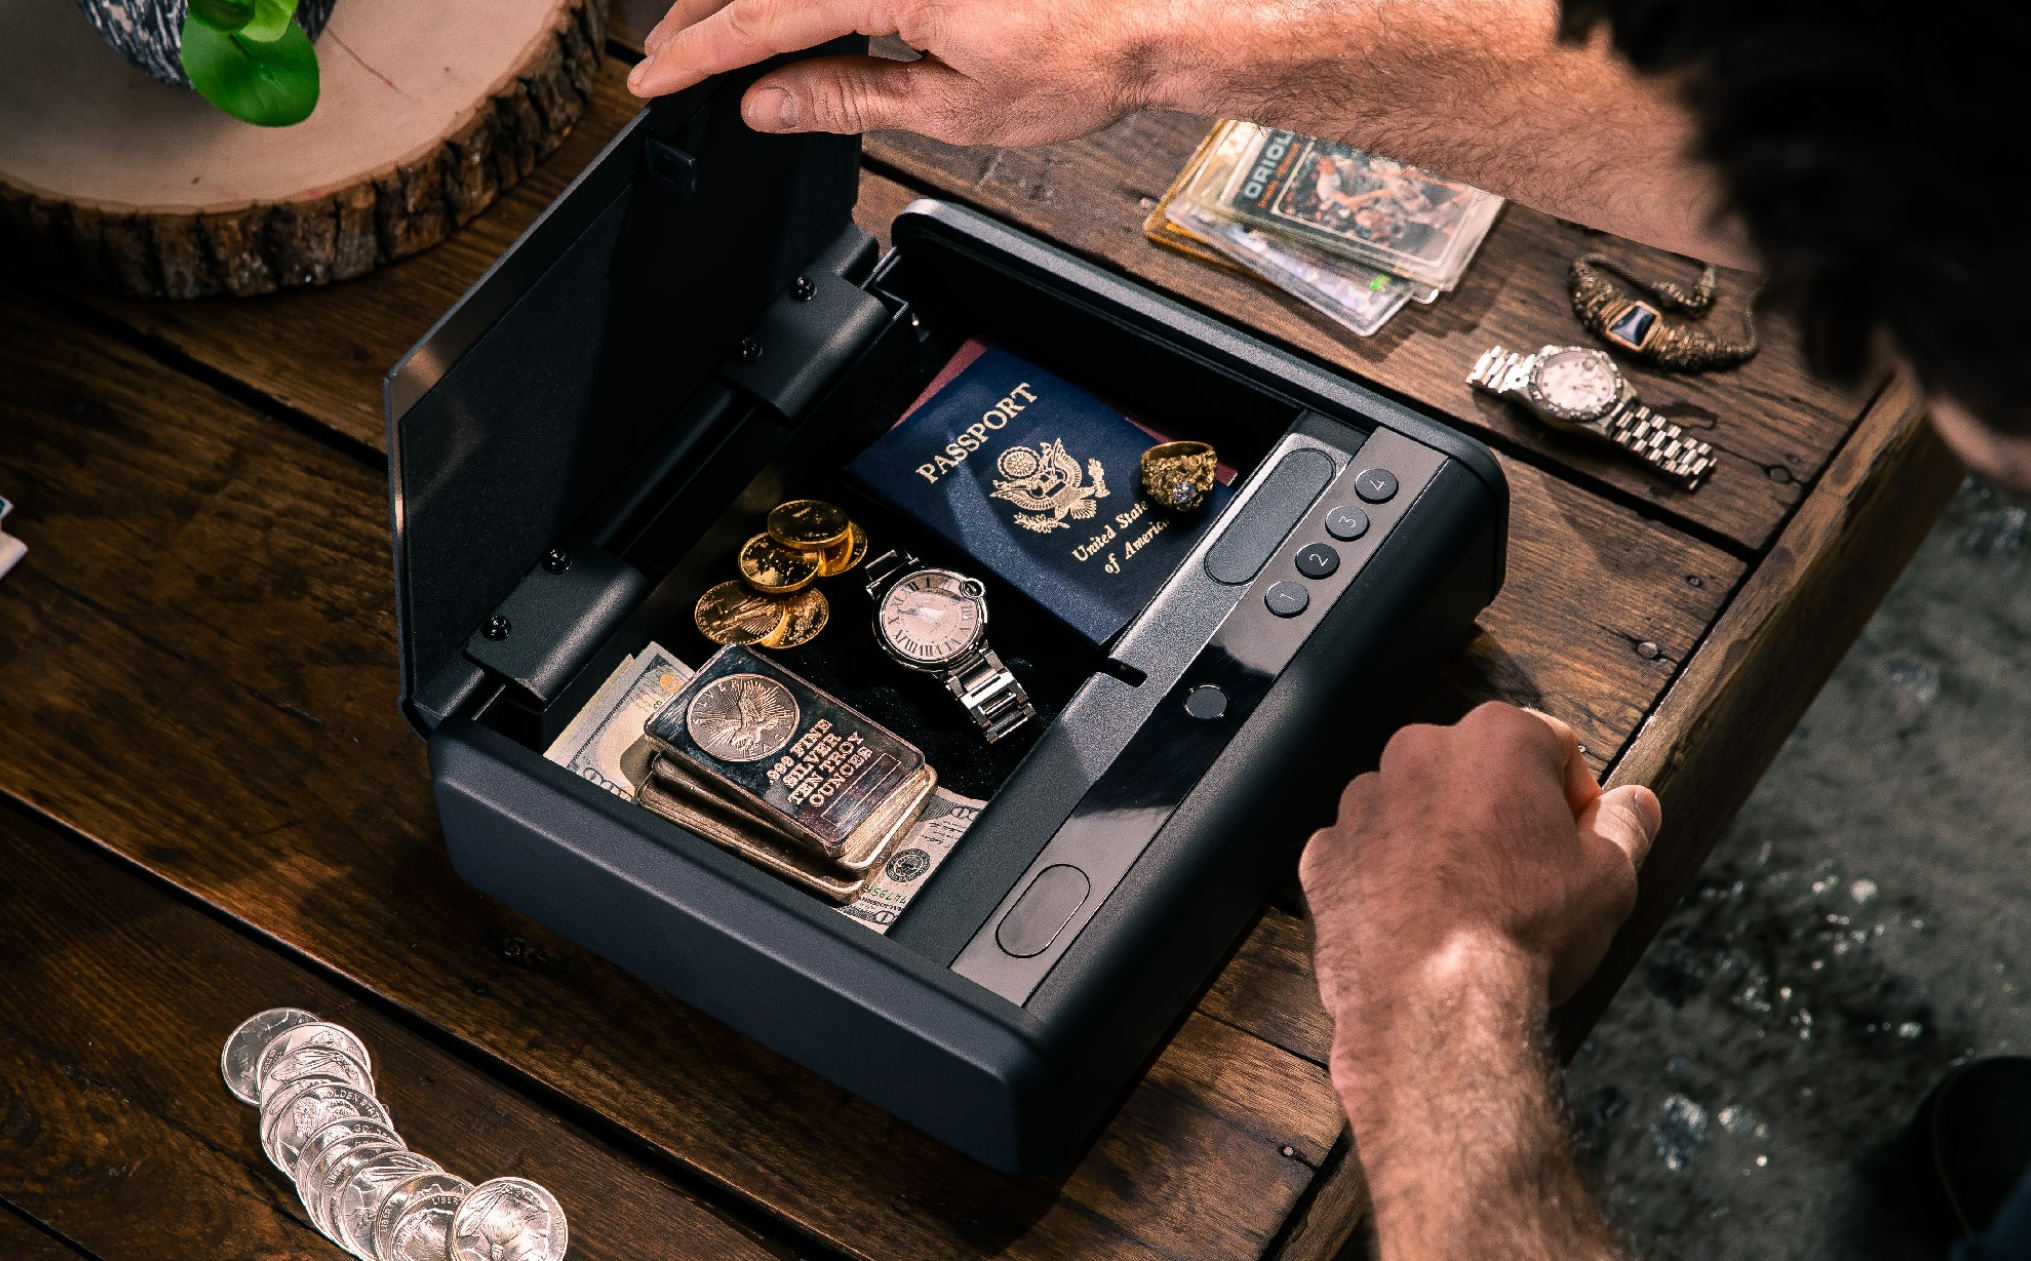 The Wyze Gun Safe with a passport and other valuables.